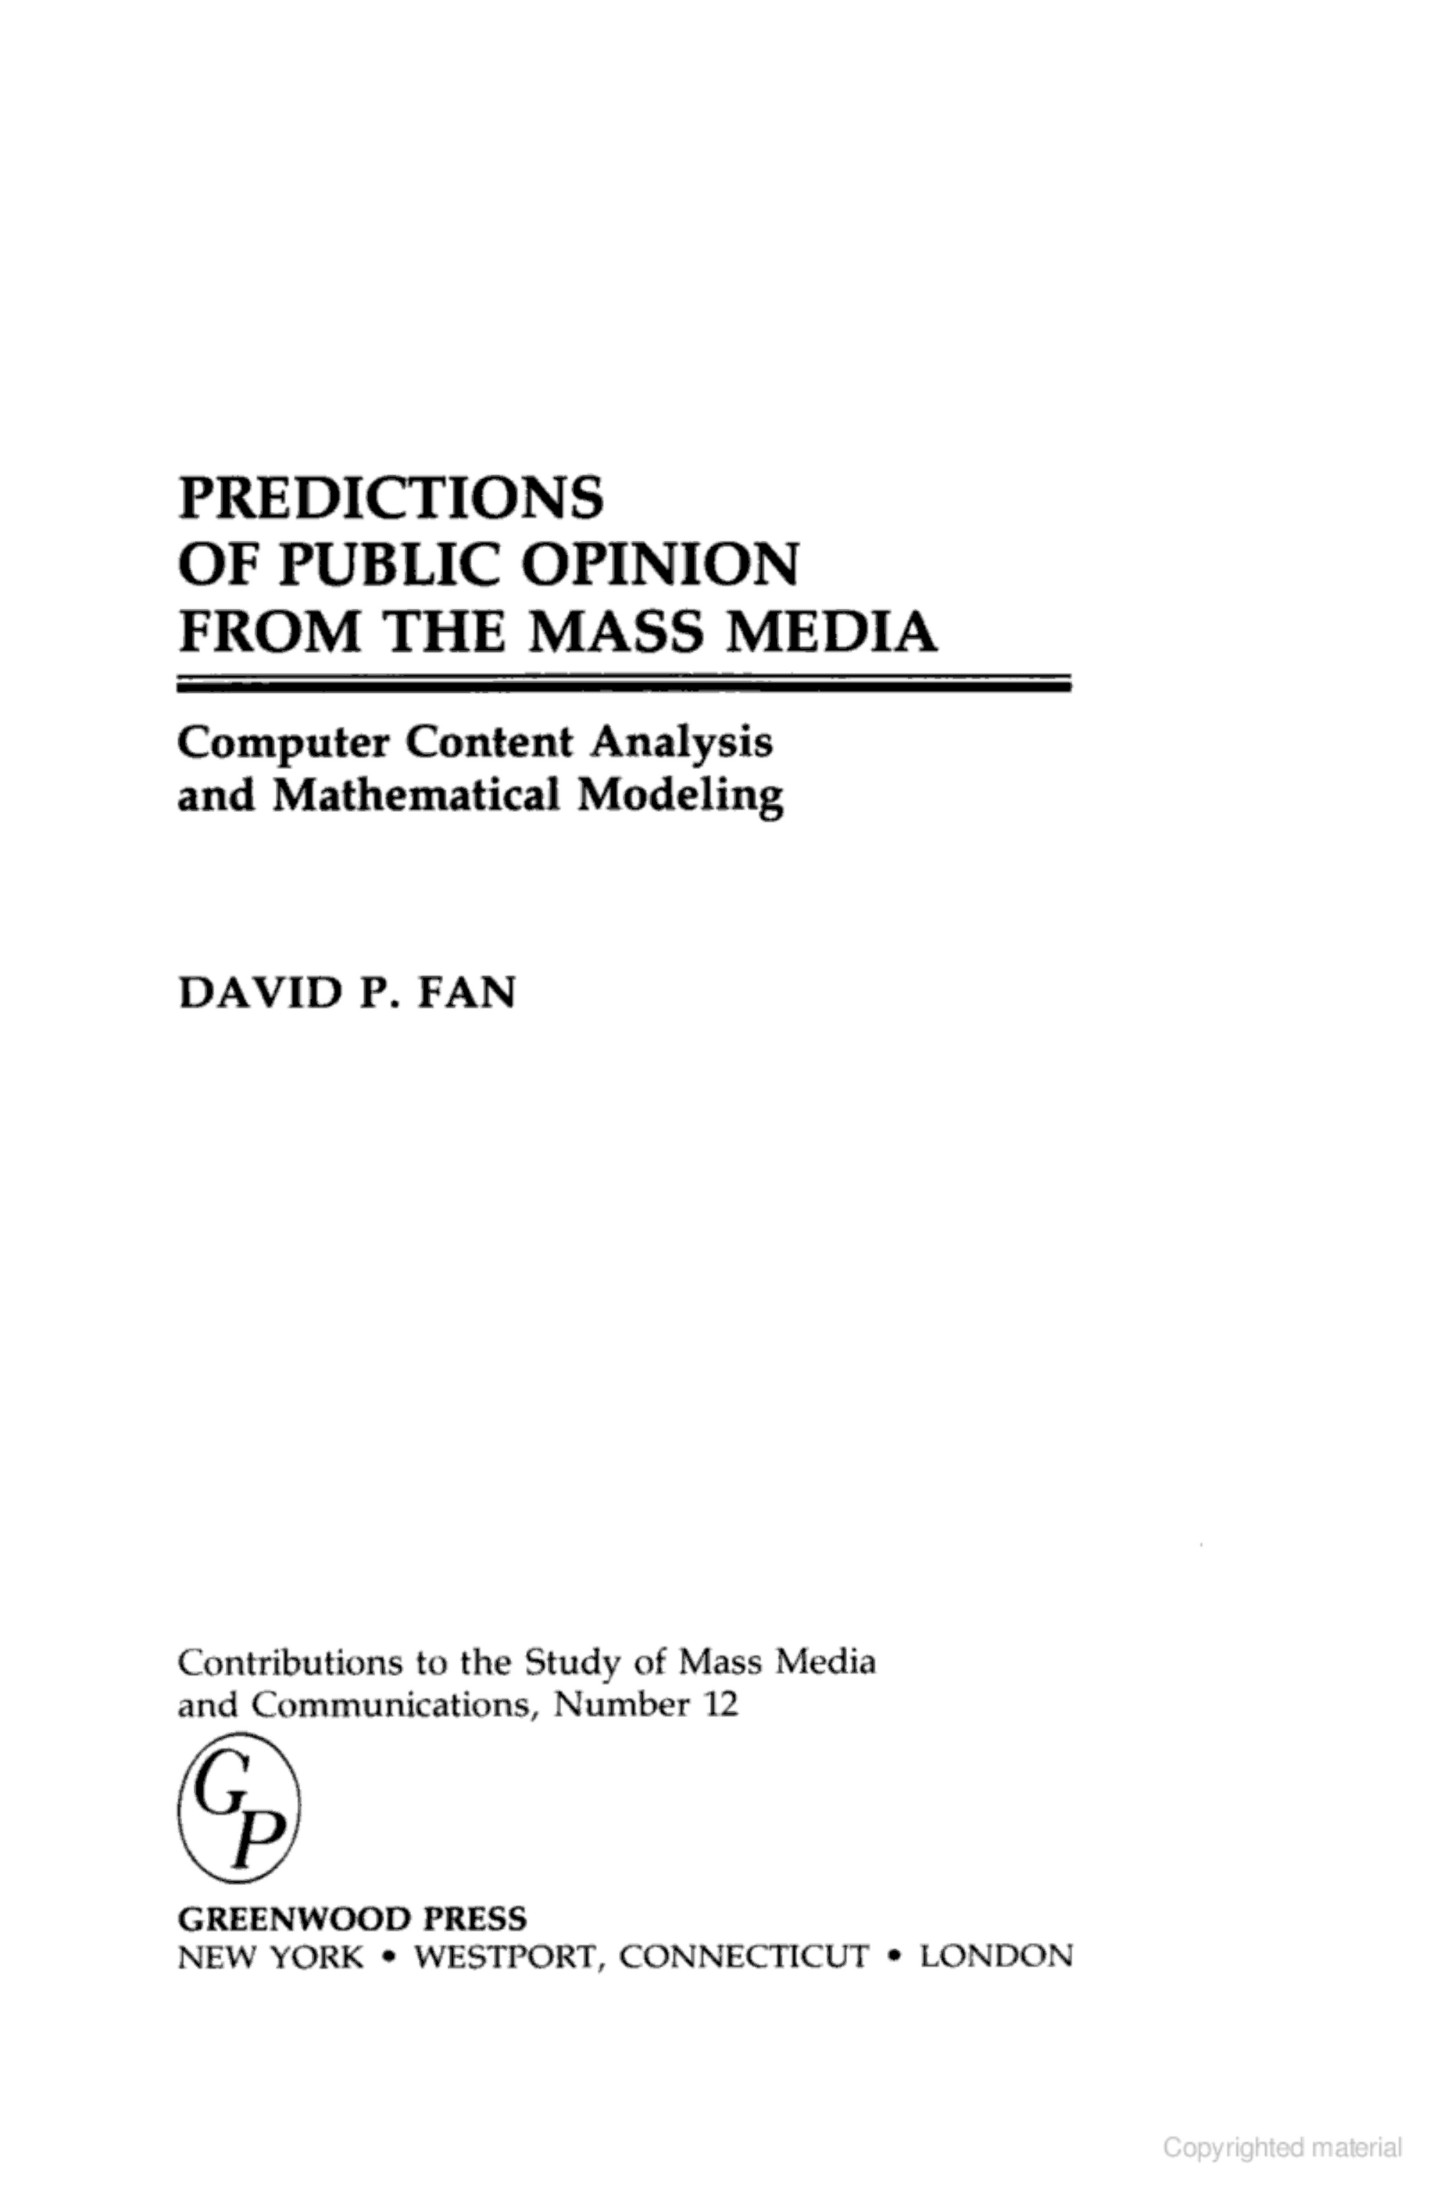 Predictions of public opinion from the mass media